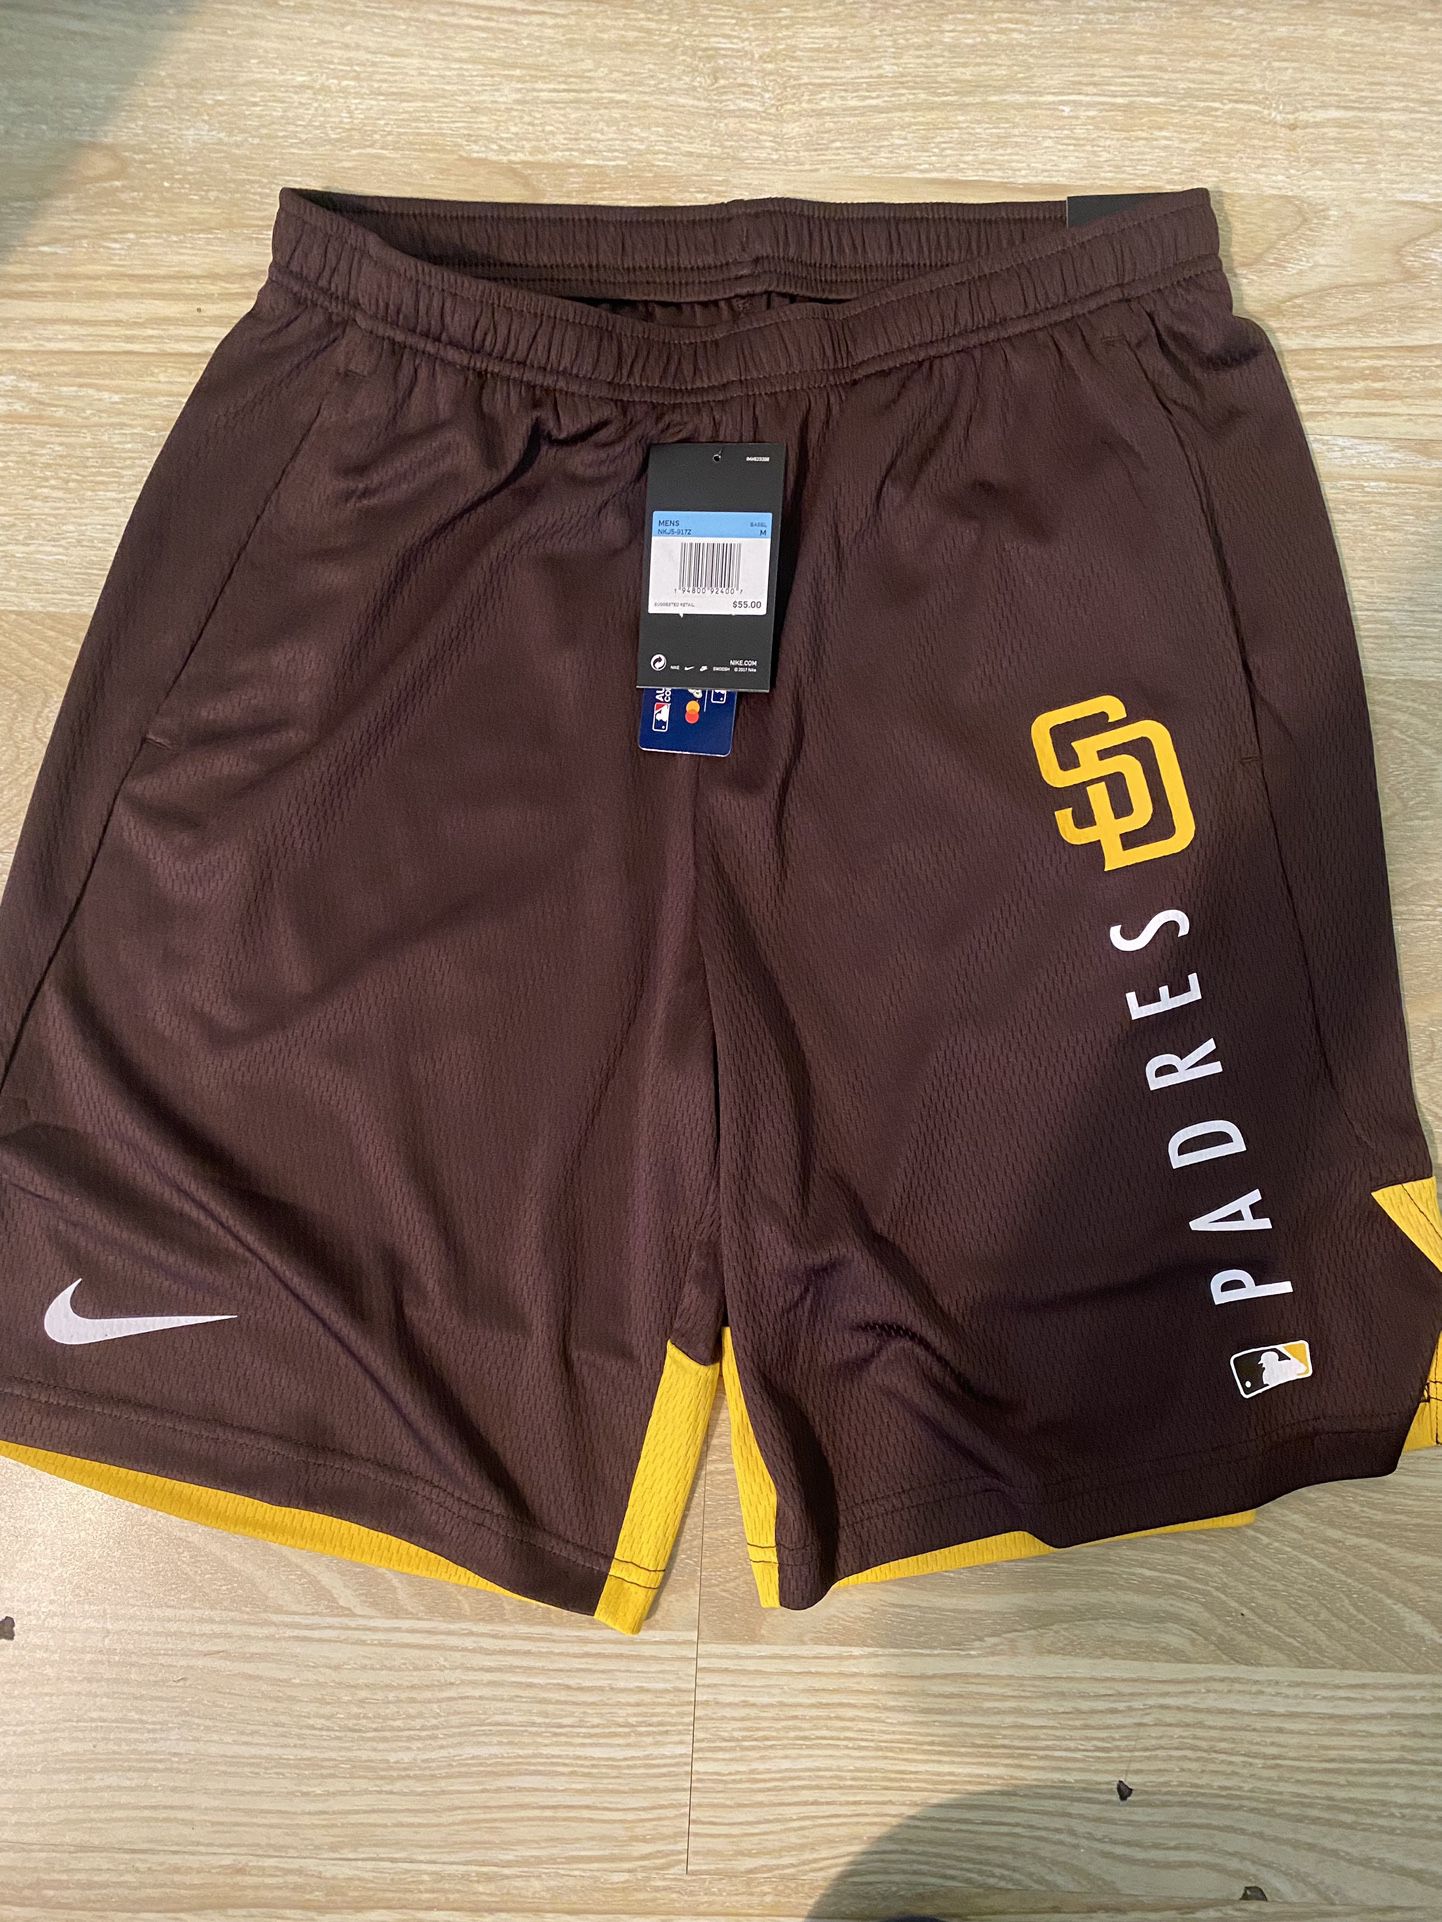 NWT Nike San Diego Padres Authentic Collection Training Performance Shorts Sz M